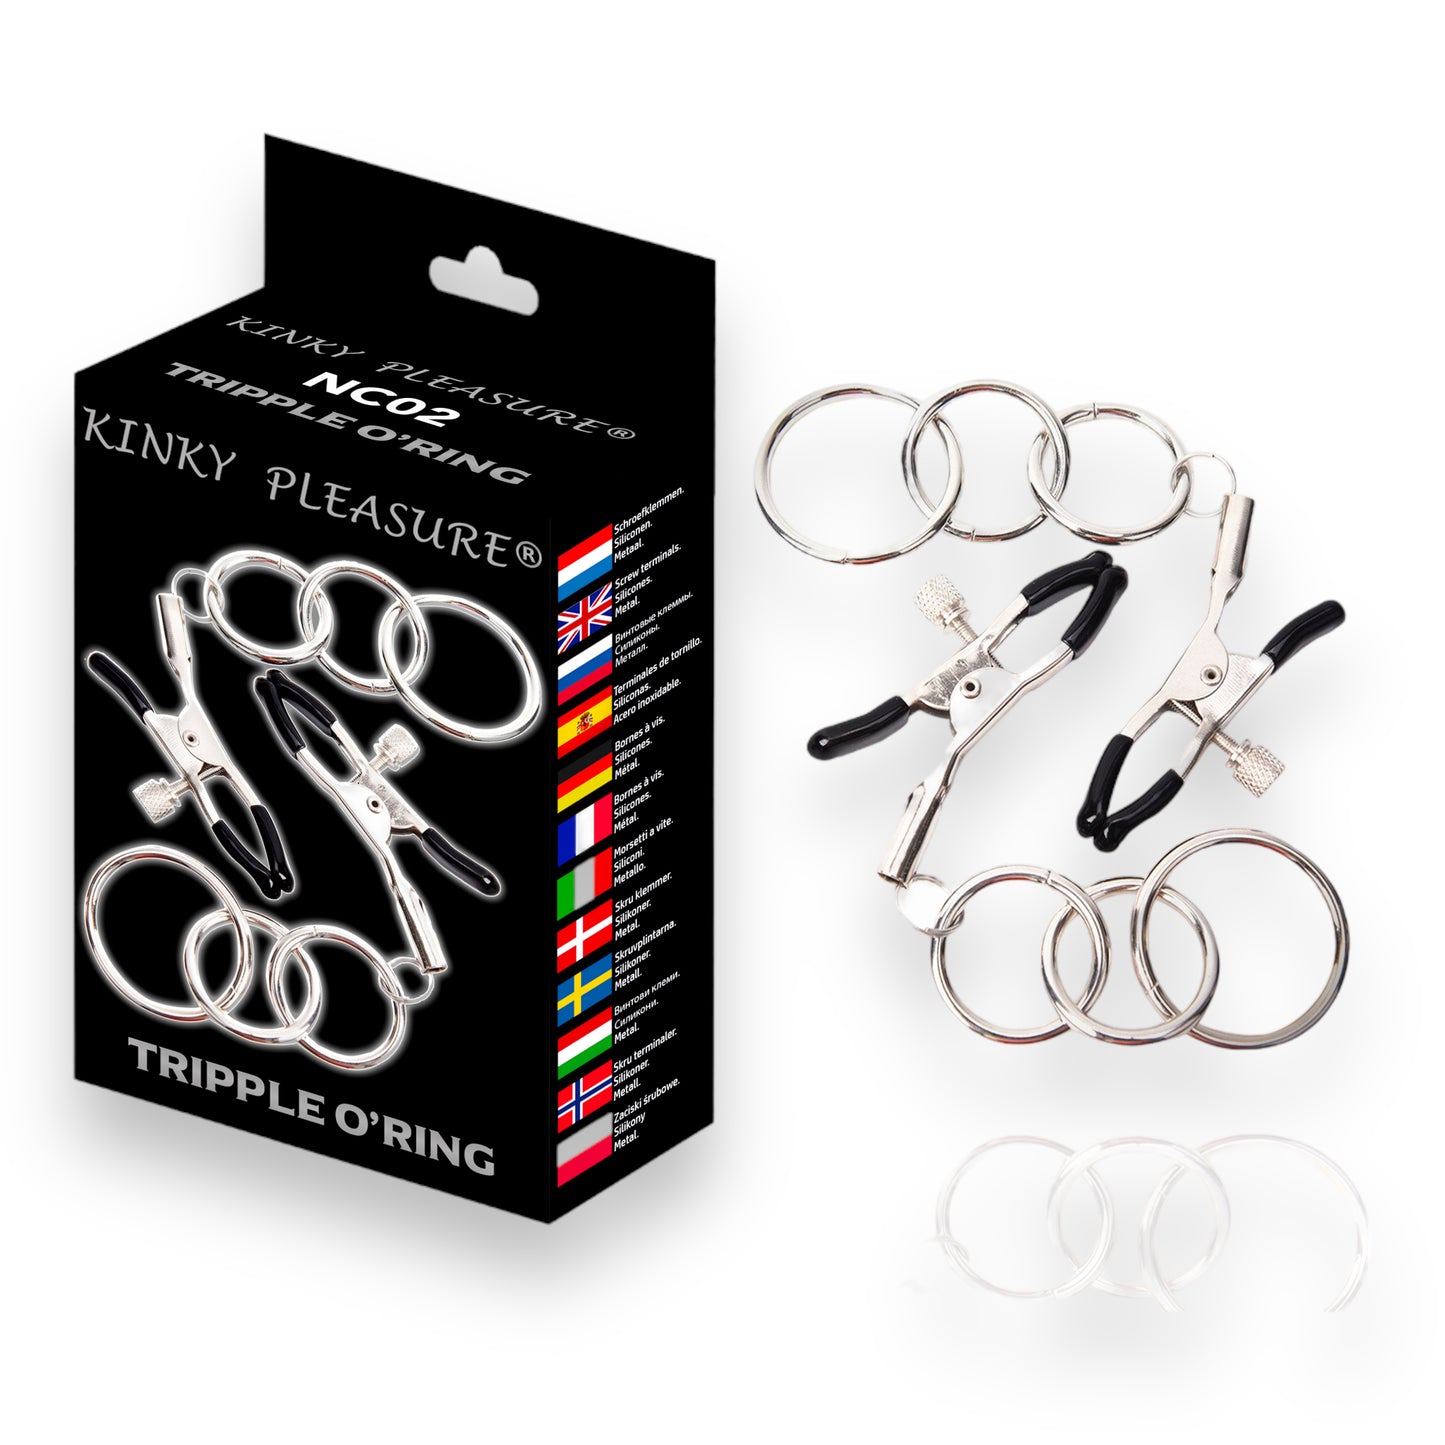 Kinky Pleasure - Nipple Clamps - 7 Models - All in Luxury Colour Box - All Models 1x - 7 Pieces